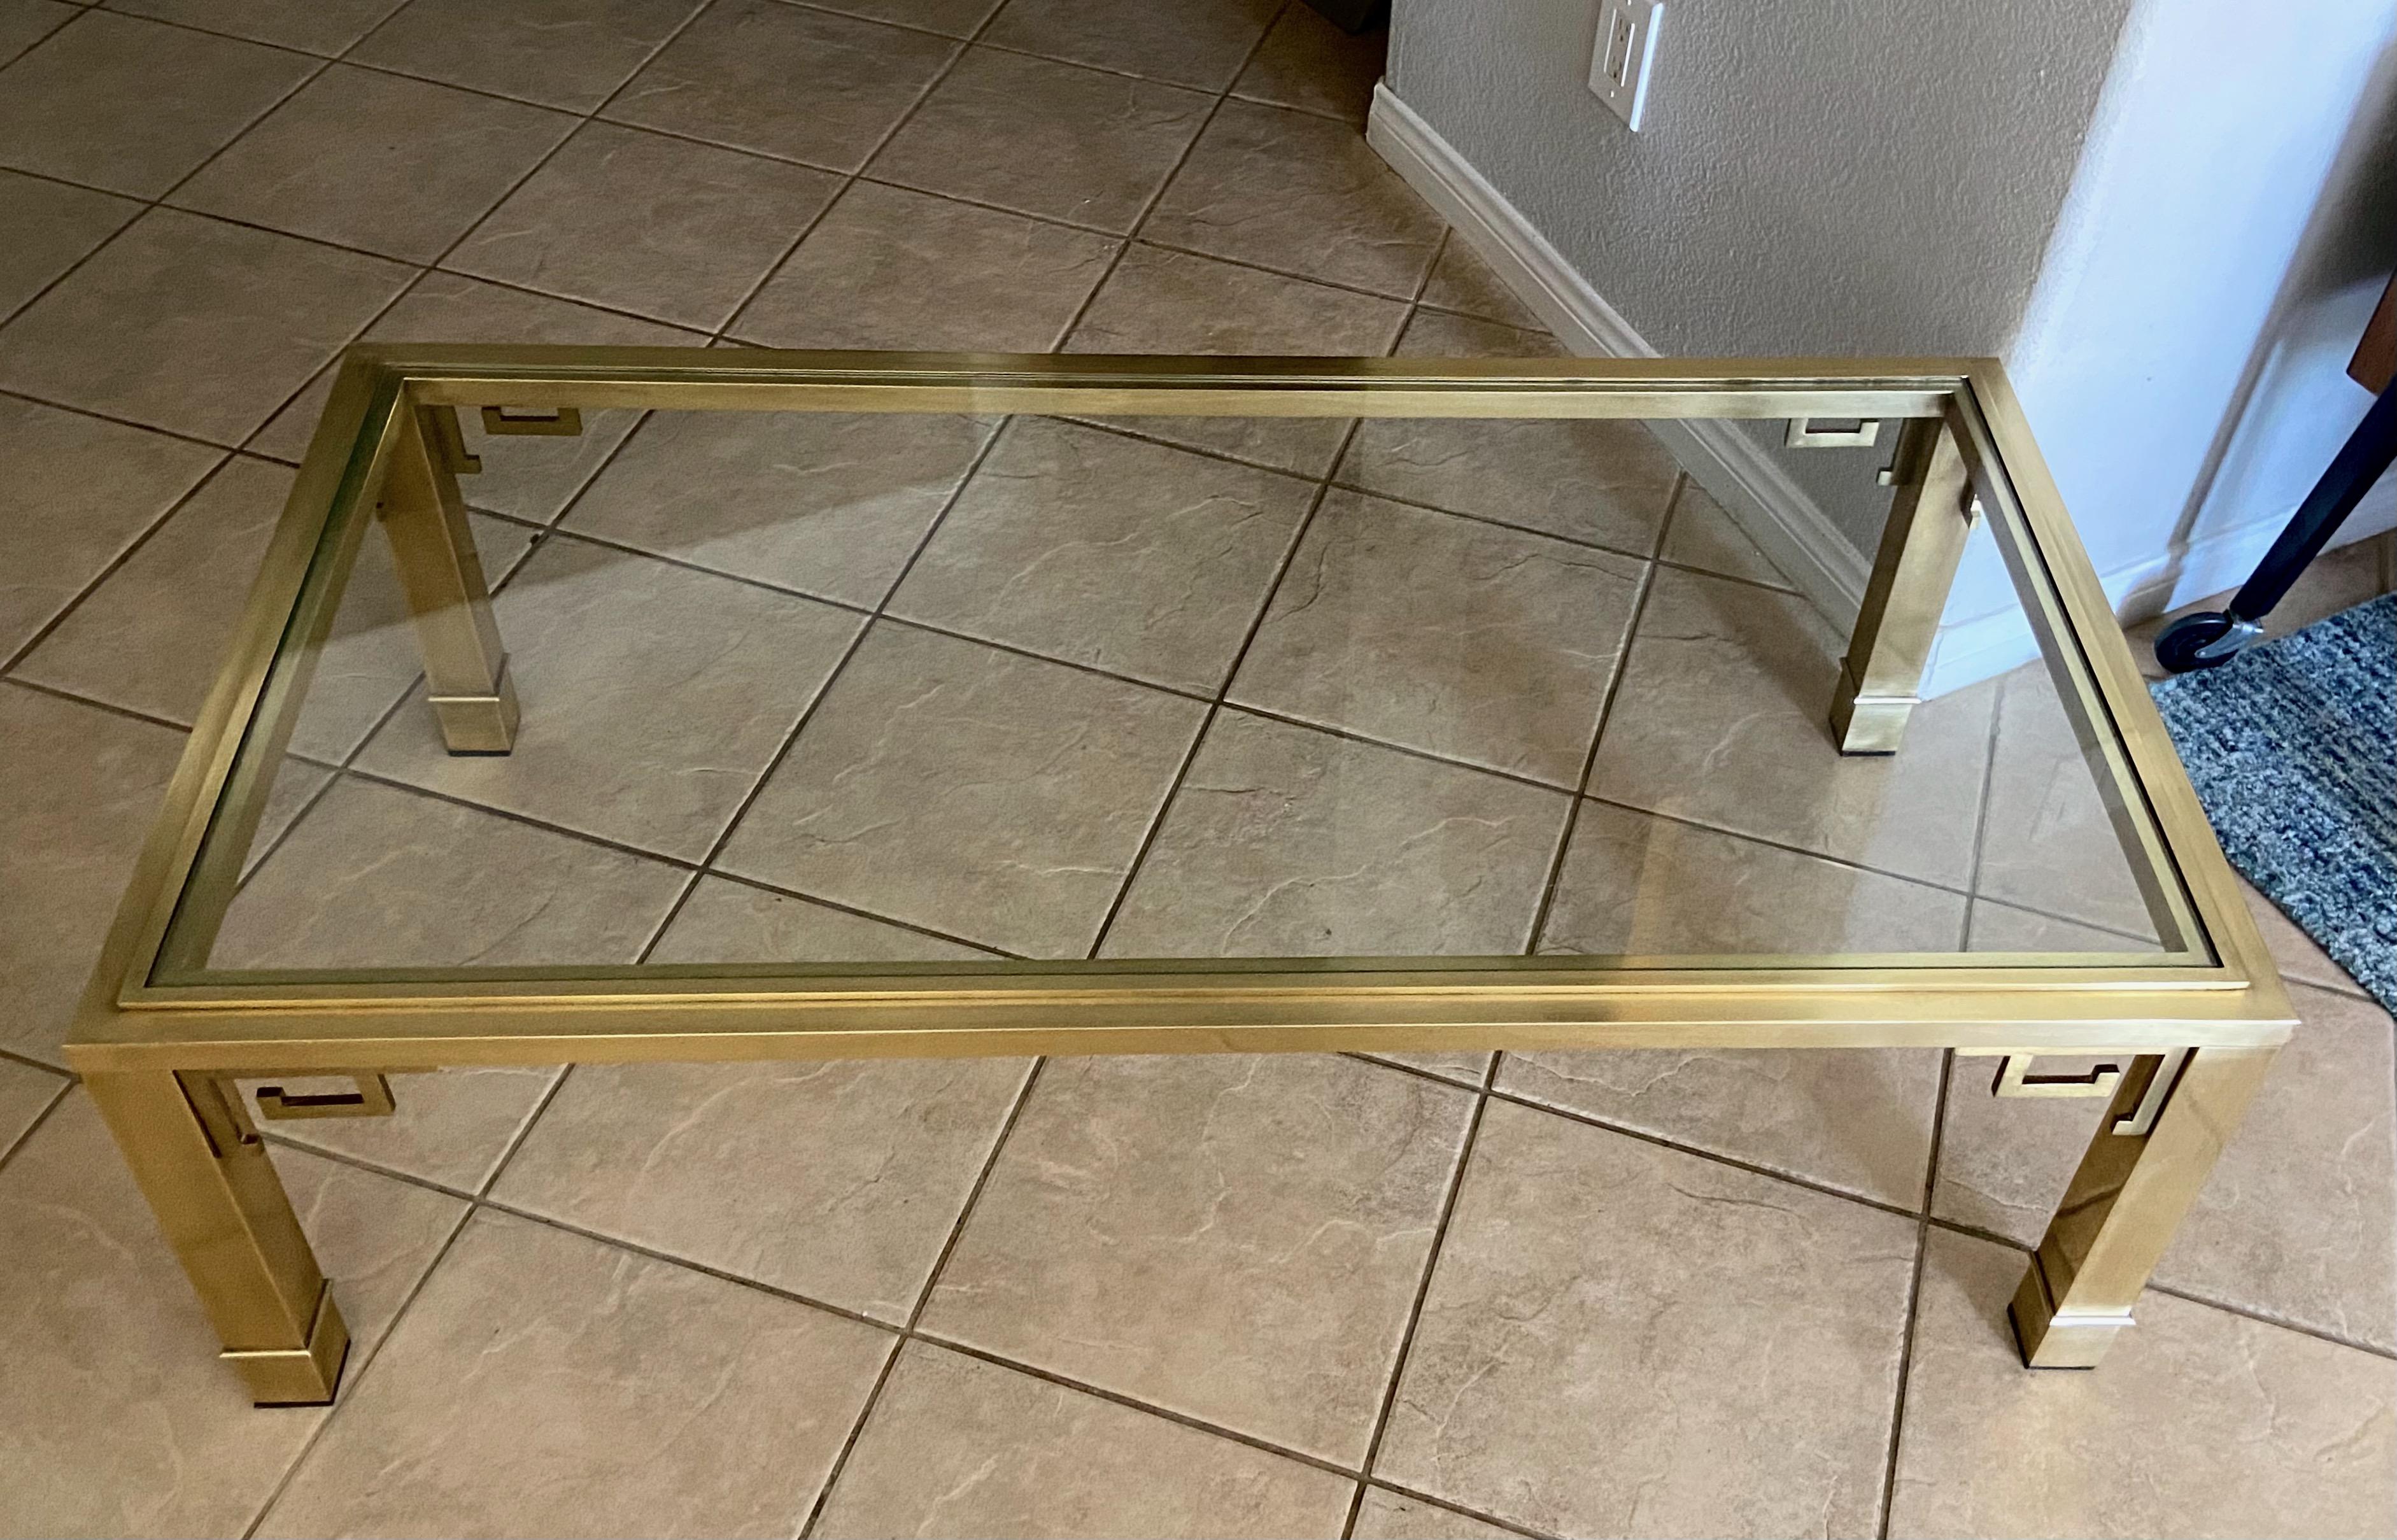 Mastercraft rectangle brass and glass top cocktail coffee table with Greek key motif detailing.